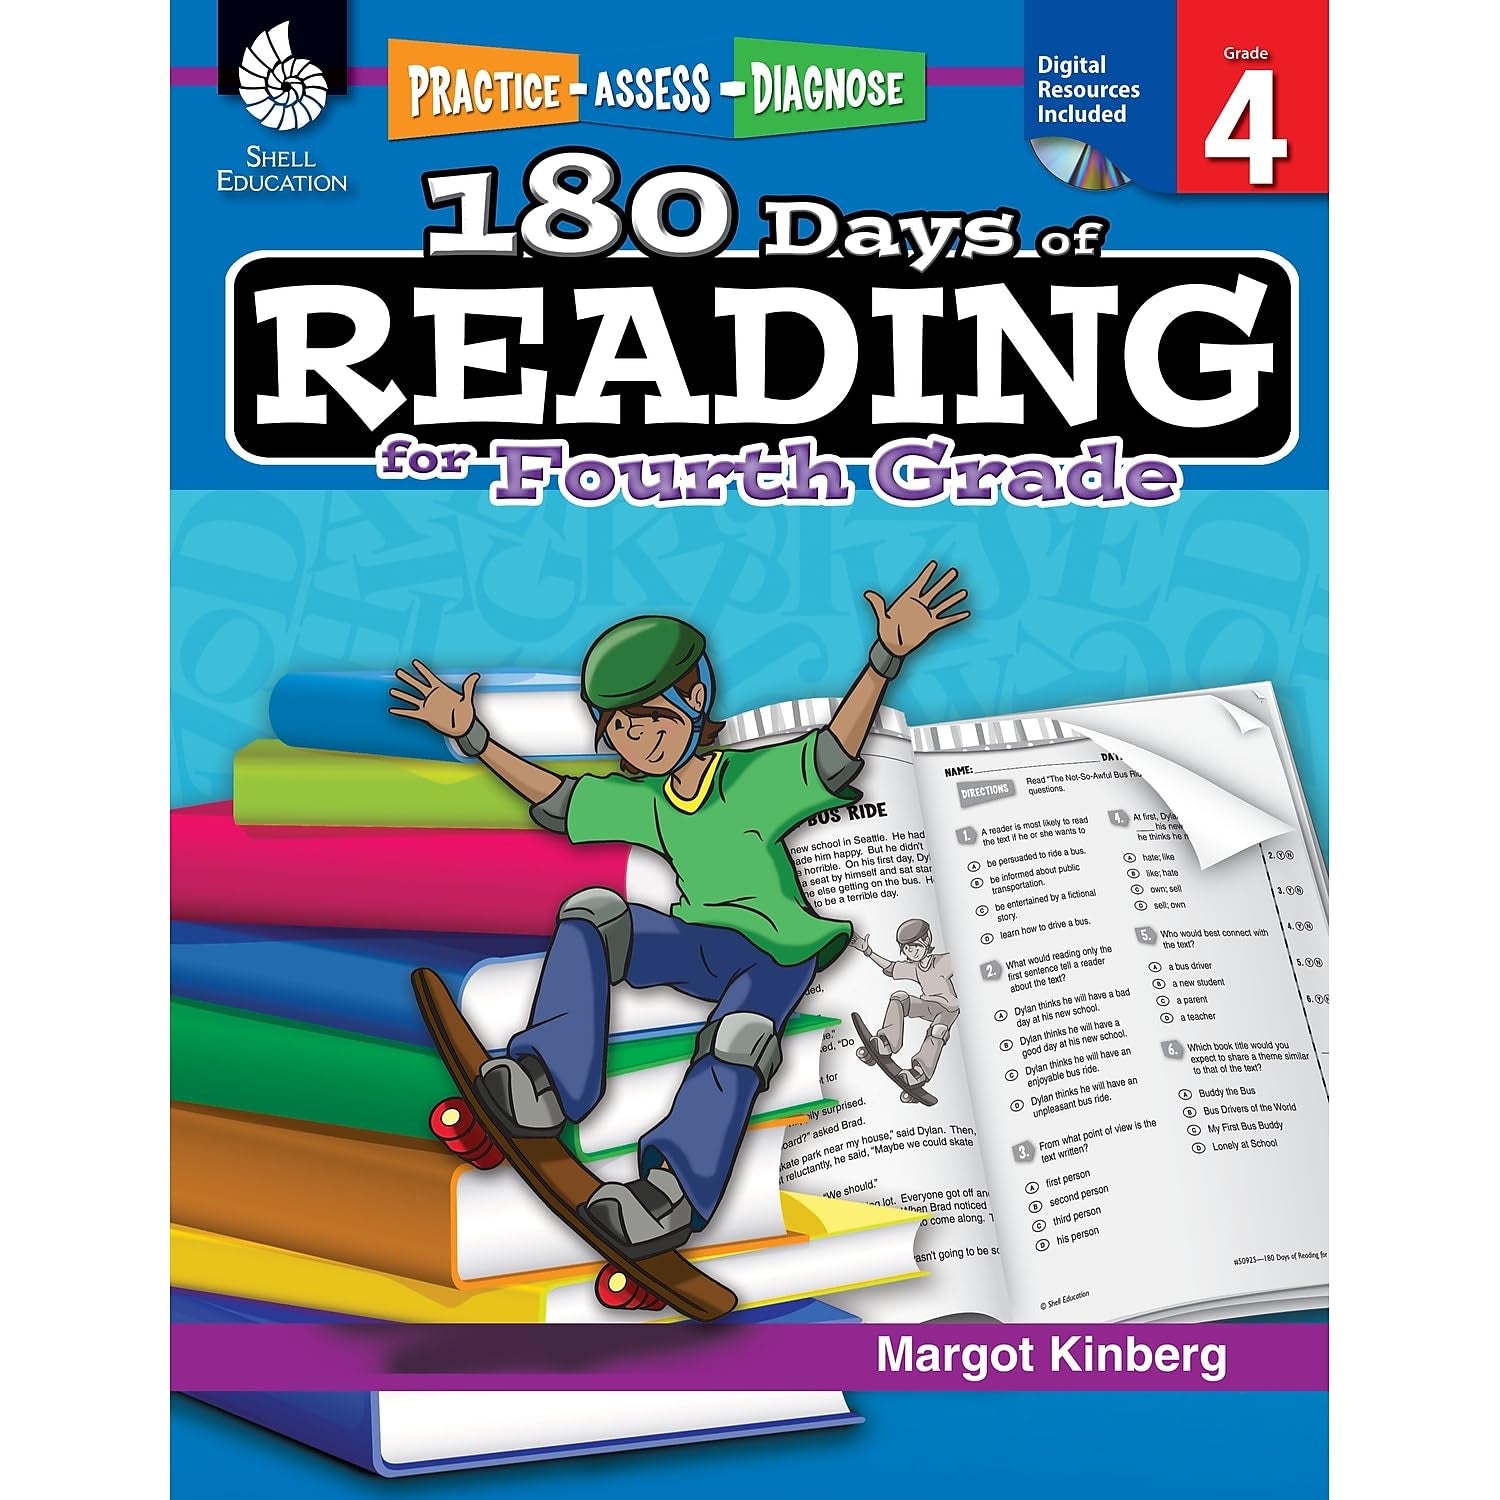 180 Days of Reading: Grade 4 - Daily Reading Workbook for Classroom and Home, Reading Comprehension and Phonics Practice, School Level Activities Created by Teachers to Master Challenging Concepts